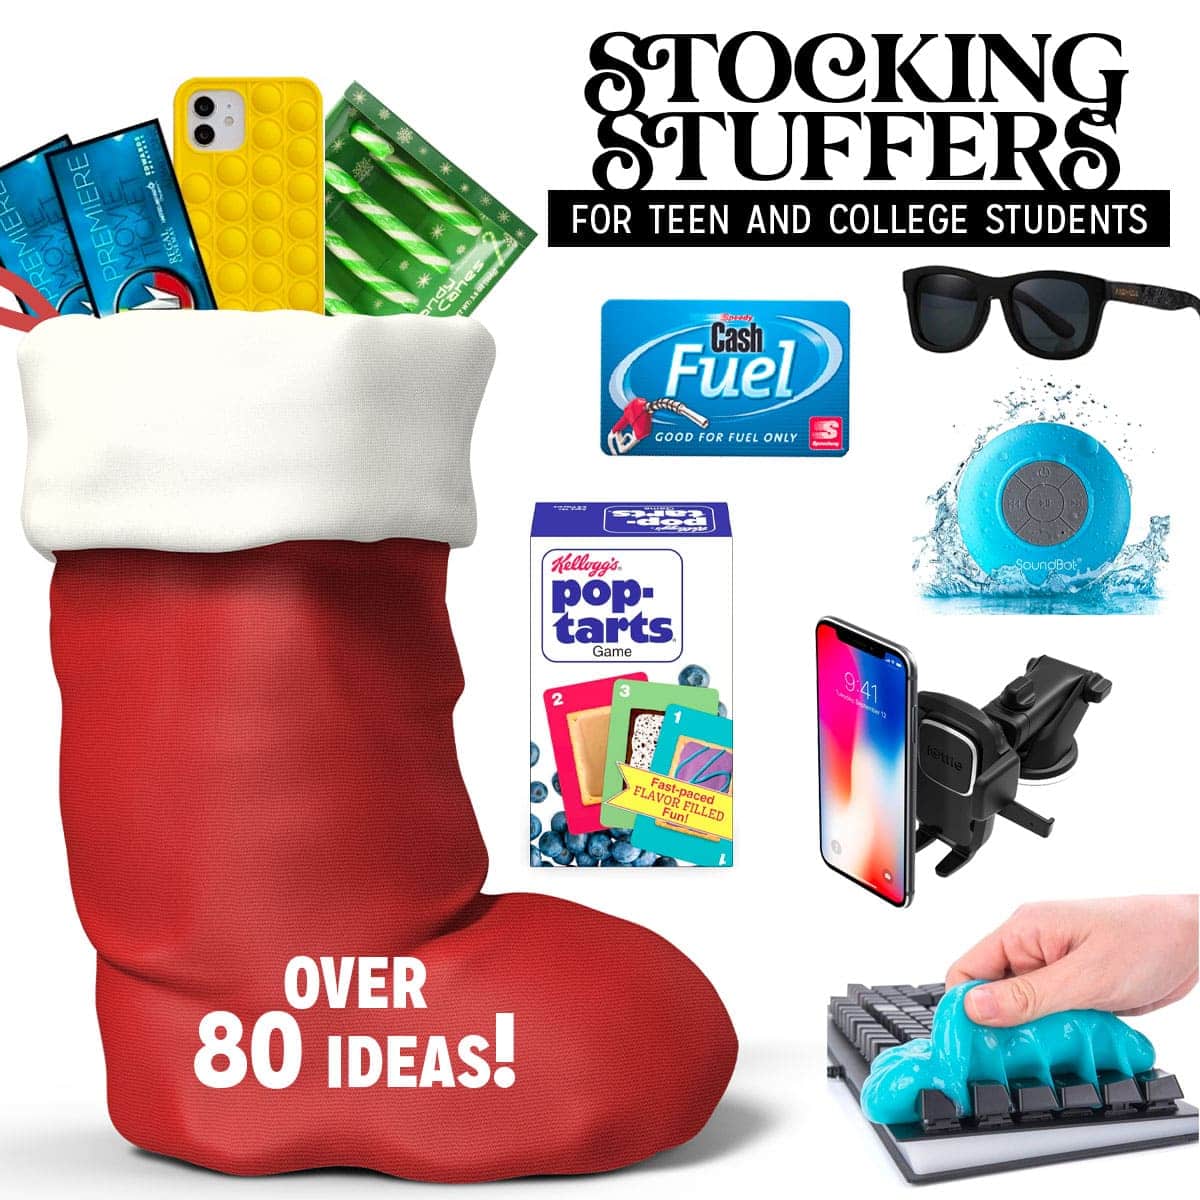 The 2021 $5 Gift Guide  $5 gift ideas, Diy stocking stuffers, 5 gifts